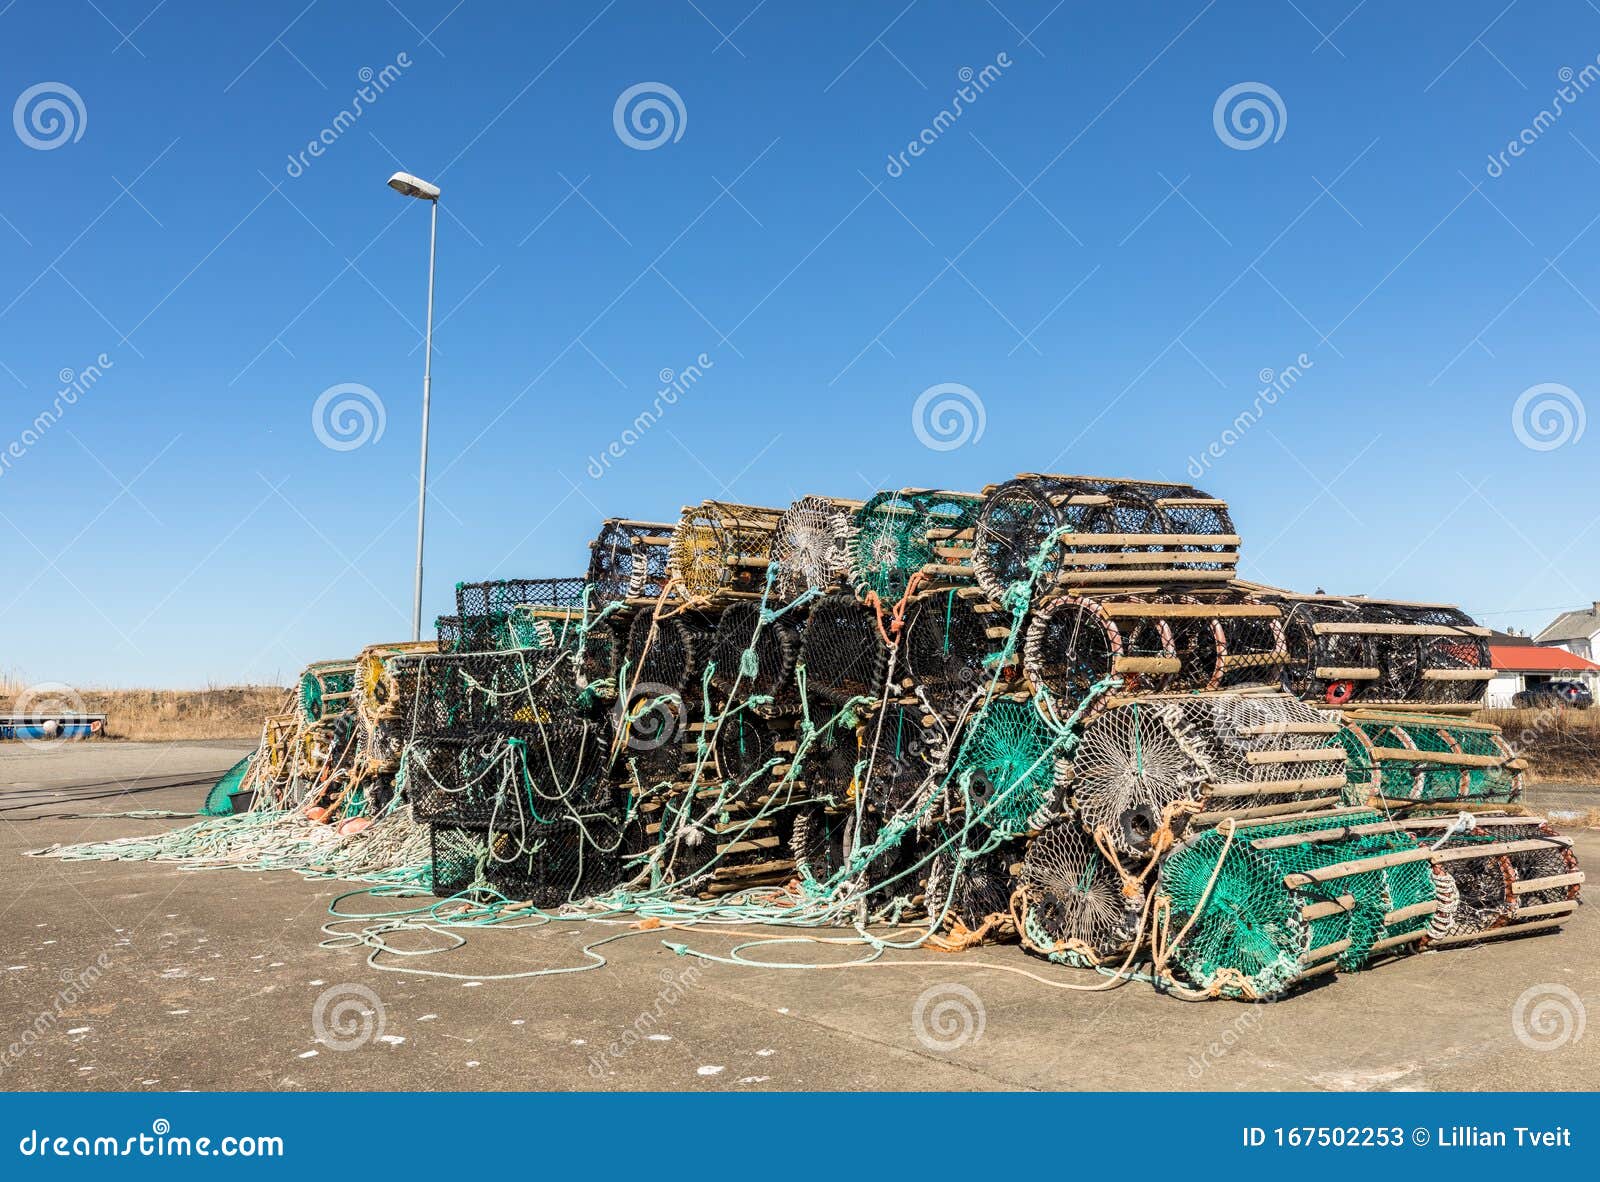 a selection of lobster pots on land, in the small fishing village lista, norway